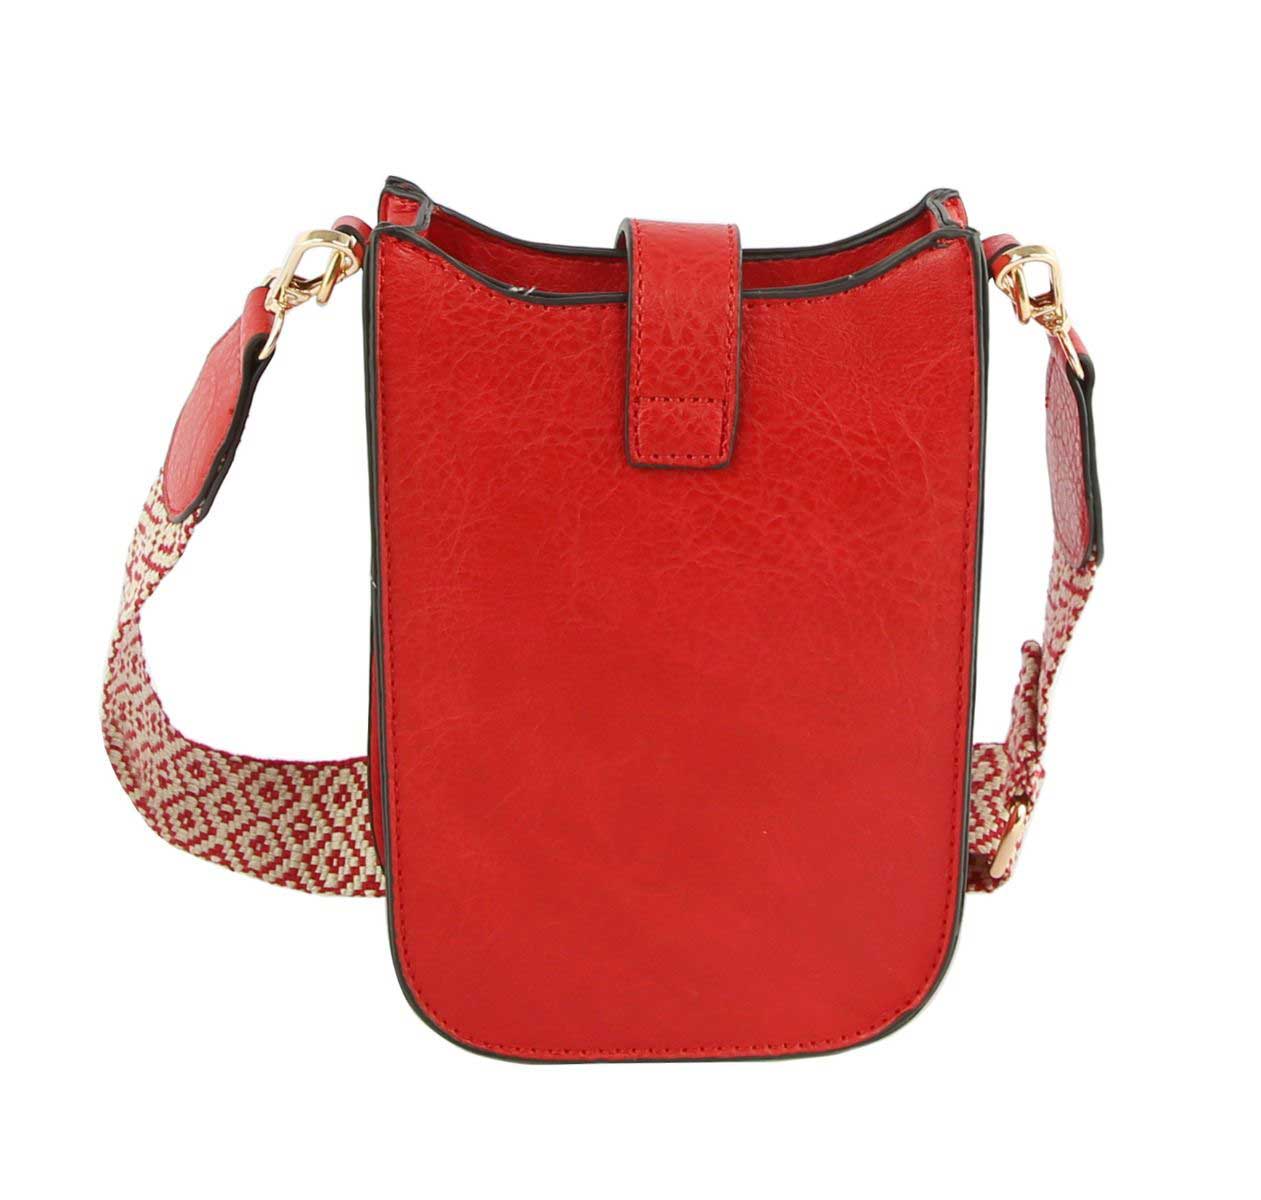 Red Vegan Leather Crossbody Bag with Adjustable Guitar Straps, perfectly goes with any outfit and shows your trendy choice to make you stand out on your occasion. Ideal for keeping your phone, makeup, money, bank cards, lipstick, coins, and other small essentials in one place. It's lightweight & versatile enough to carry with different outfits throughout the week. Perfect gifts for your lovers and lover persons on valentines Day. Stay comfortable & attractive on occasion.